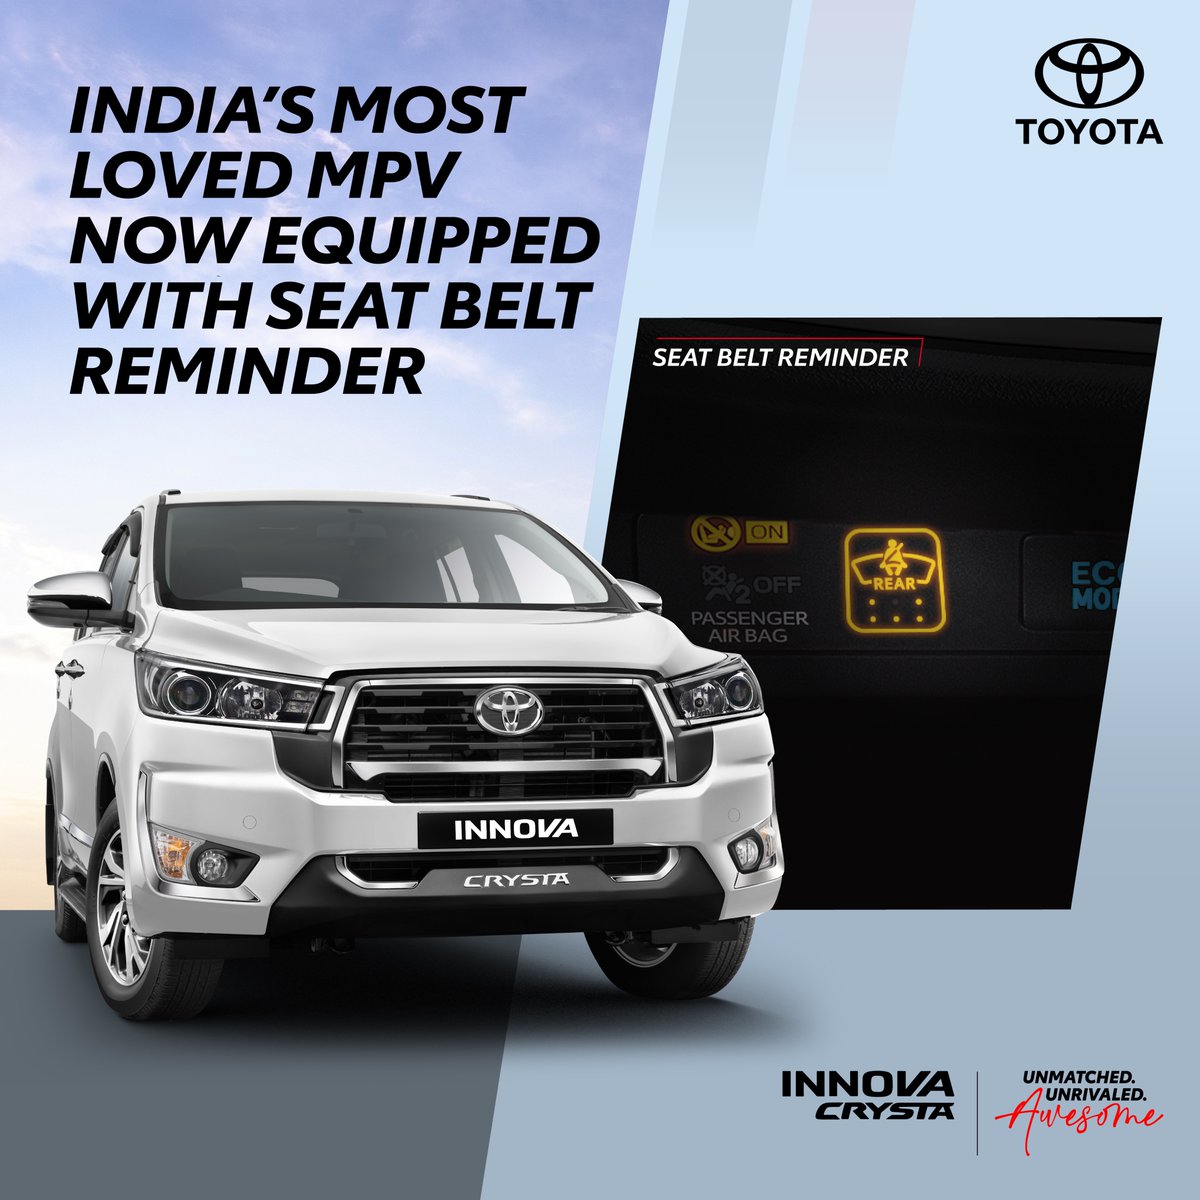 The #InnovaCrysta is India's MPV leader. With so much emphasis on safety with seat belt reminder for all seats, it's easy to see why. eBook now- bit.ly/3HyDydq #UnmatchedUnrivaled #ToyotaIndia